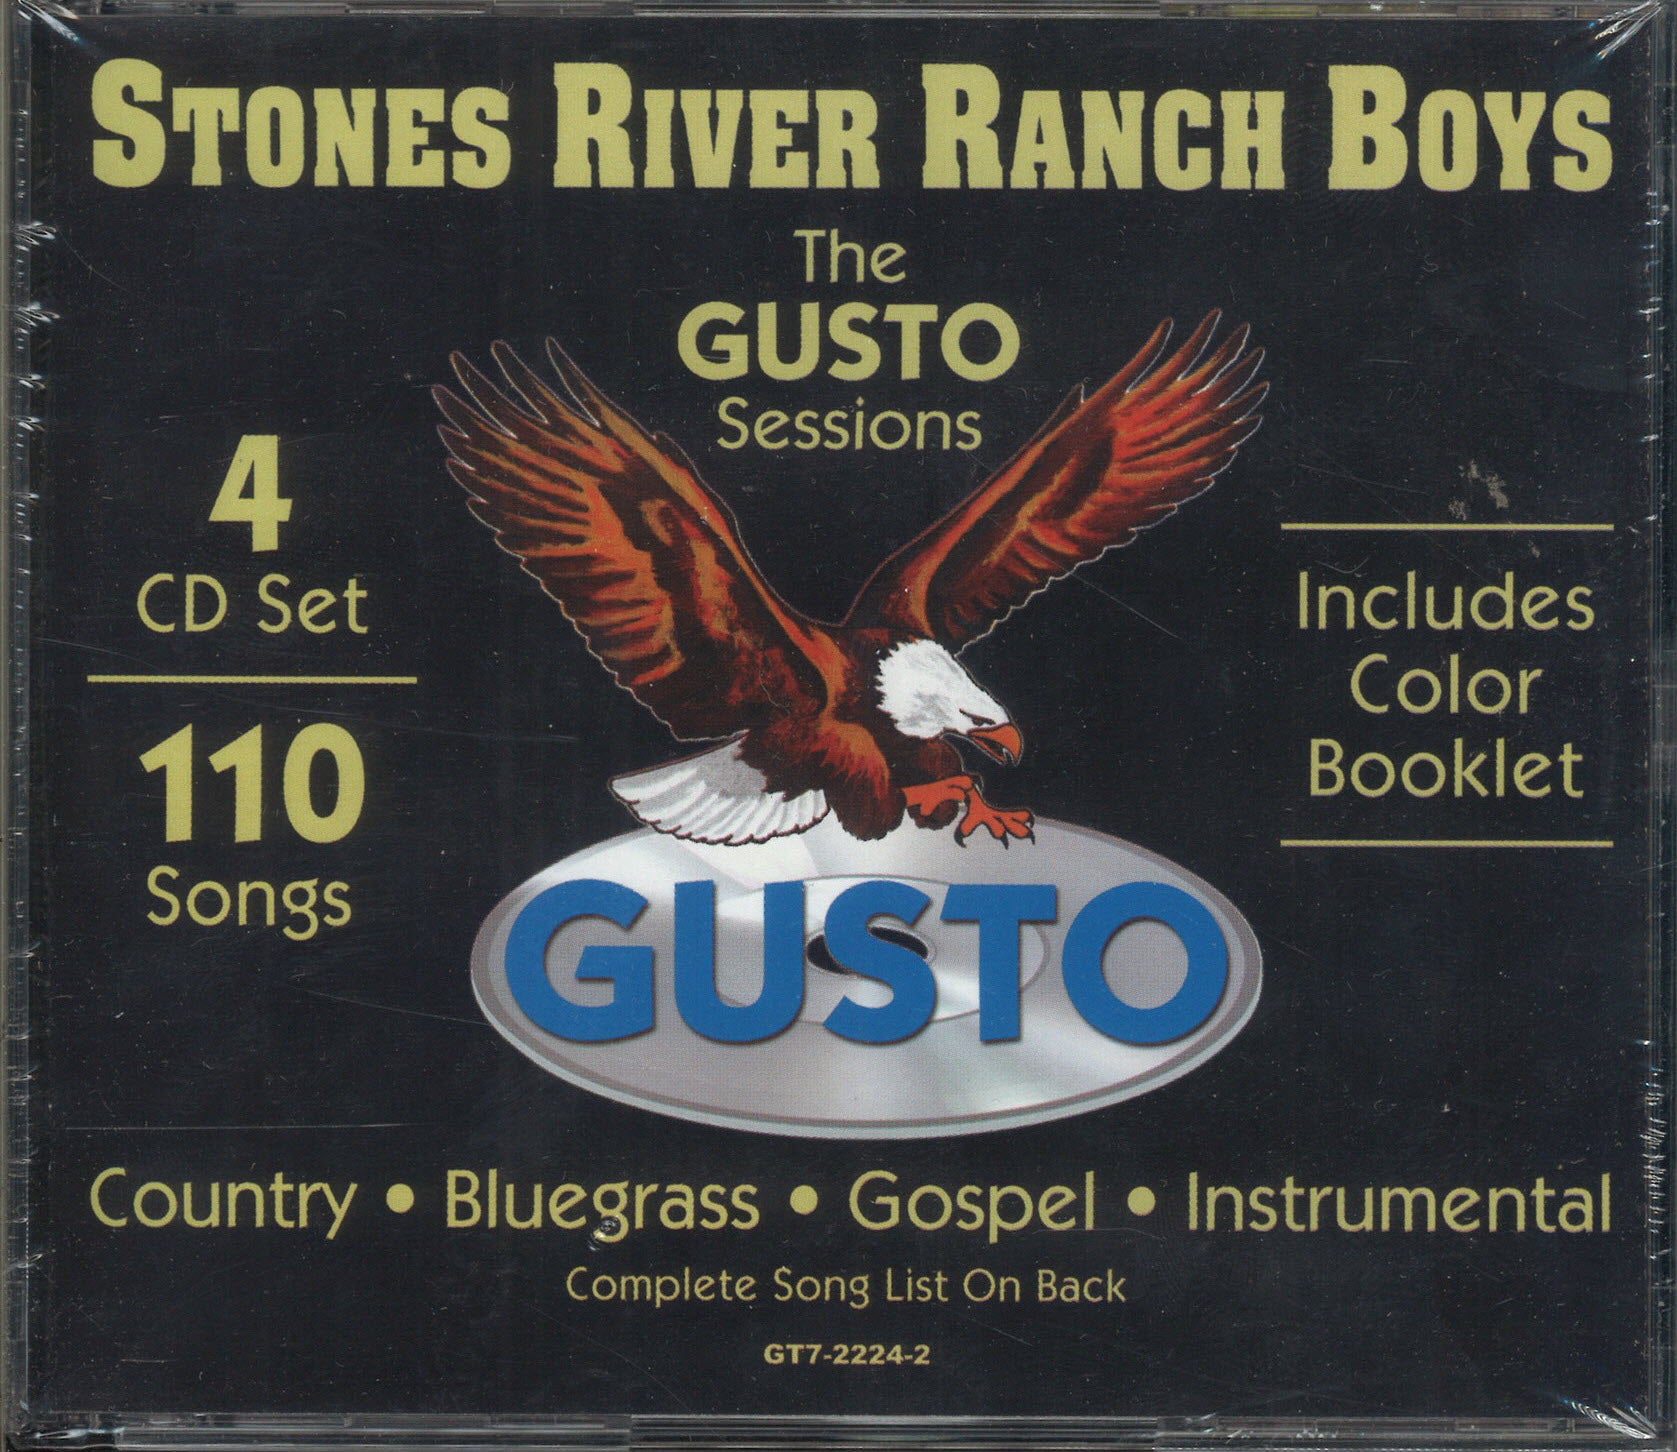 Stones River Ranch Boys The Gusto Sessions: 4 CD Set